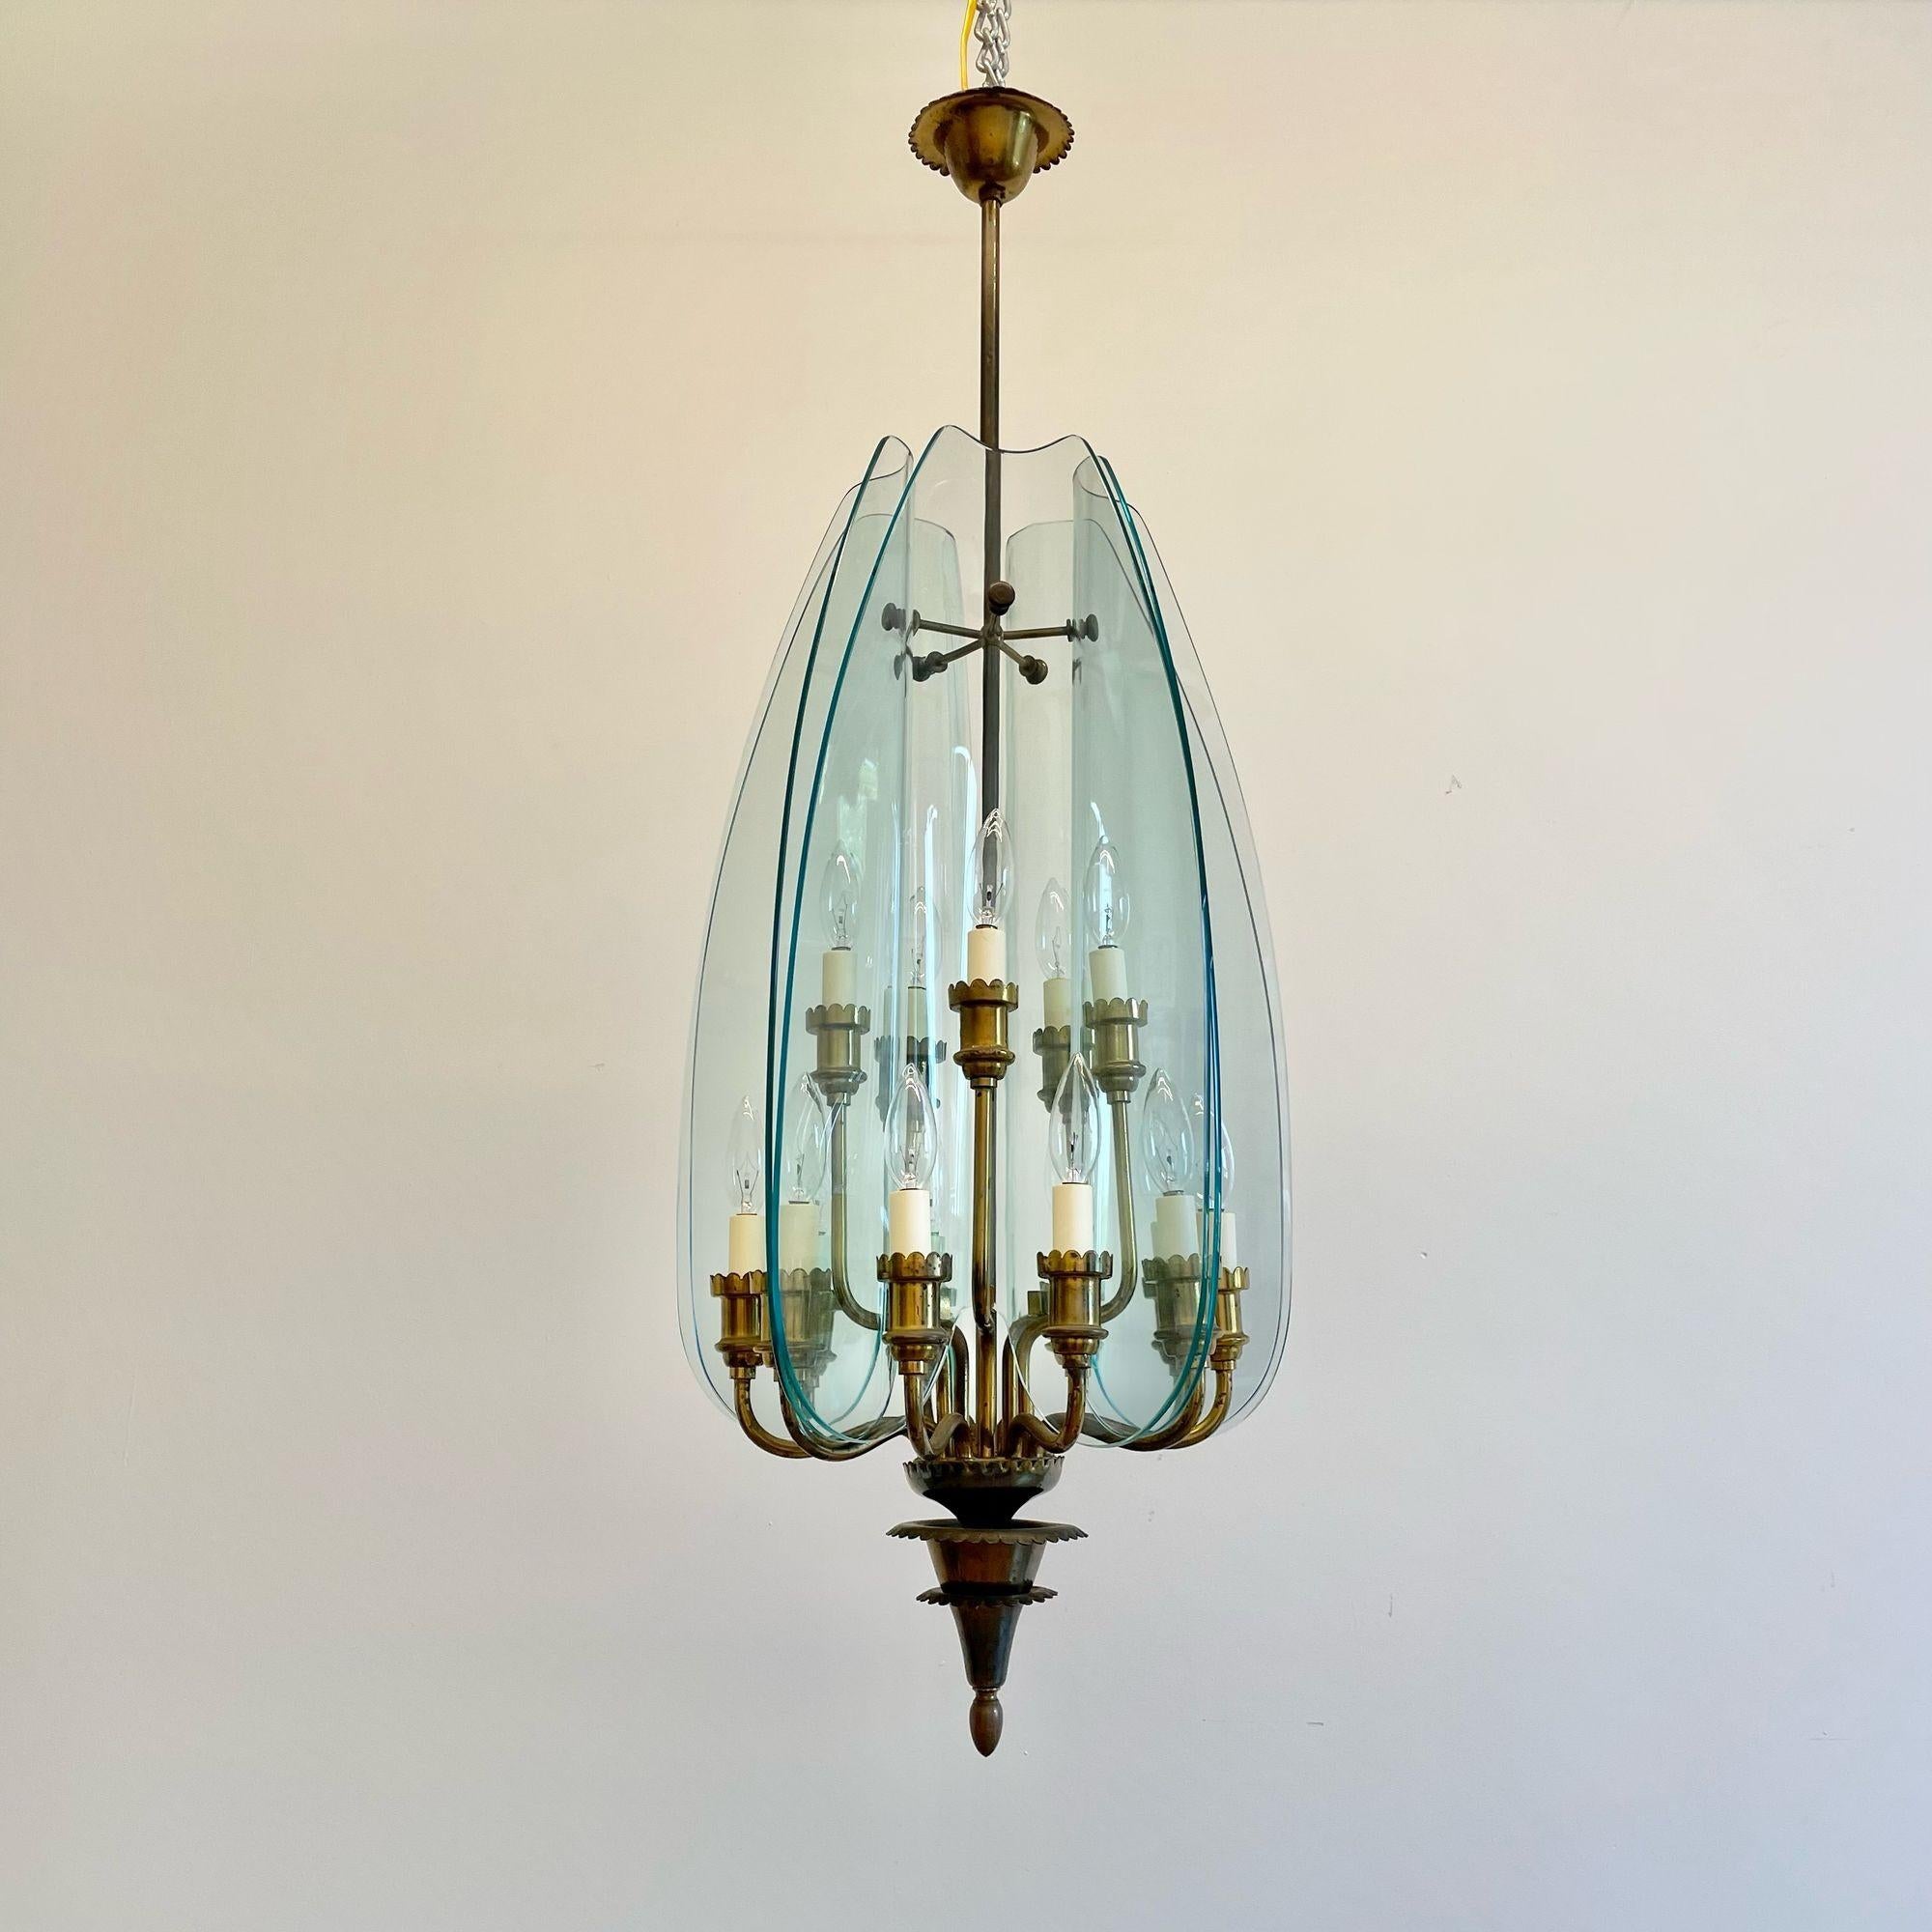 Pietro Chiesa for Fontana Arte Glass and Brass Chandelier
A brass chandelier with 15 lights and 5 vertical curved panels of glass featured in Domus n°143 designed by Pietro Chiesa for Fontana Arte, C. 1939, Italy 
 
Curved Glass, Brass
Italy,